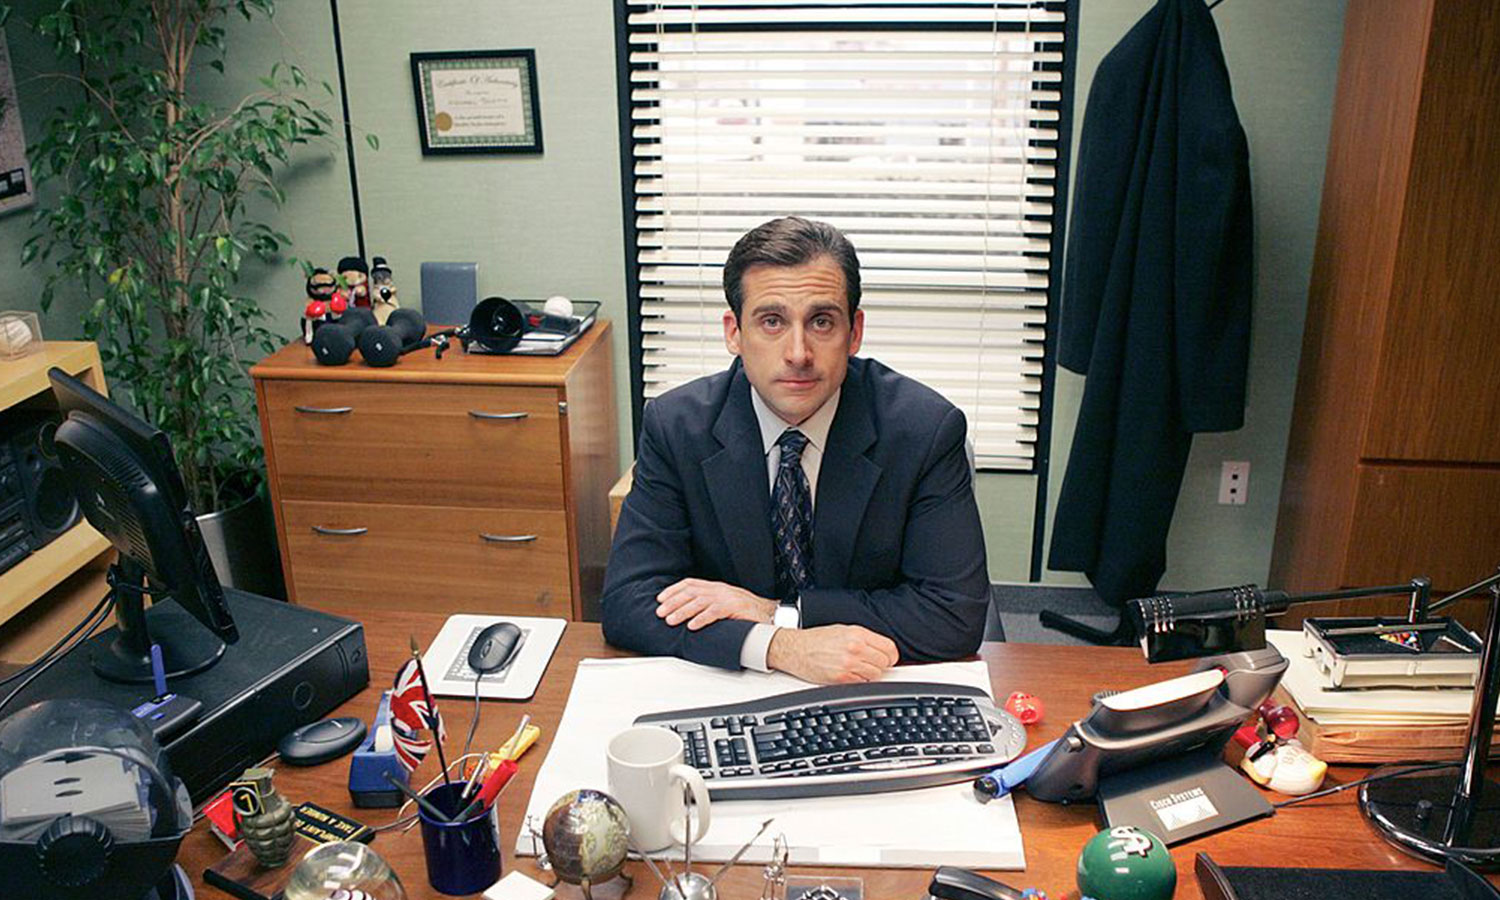 download the office show